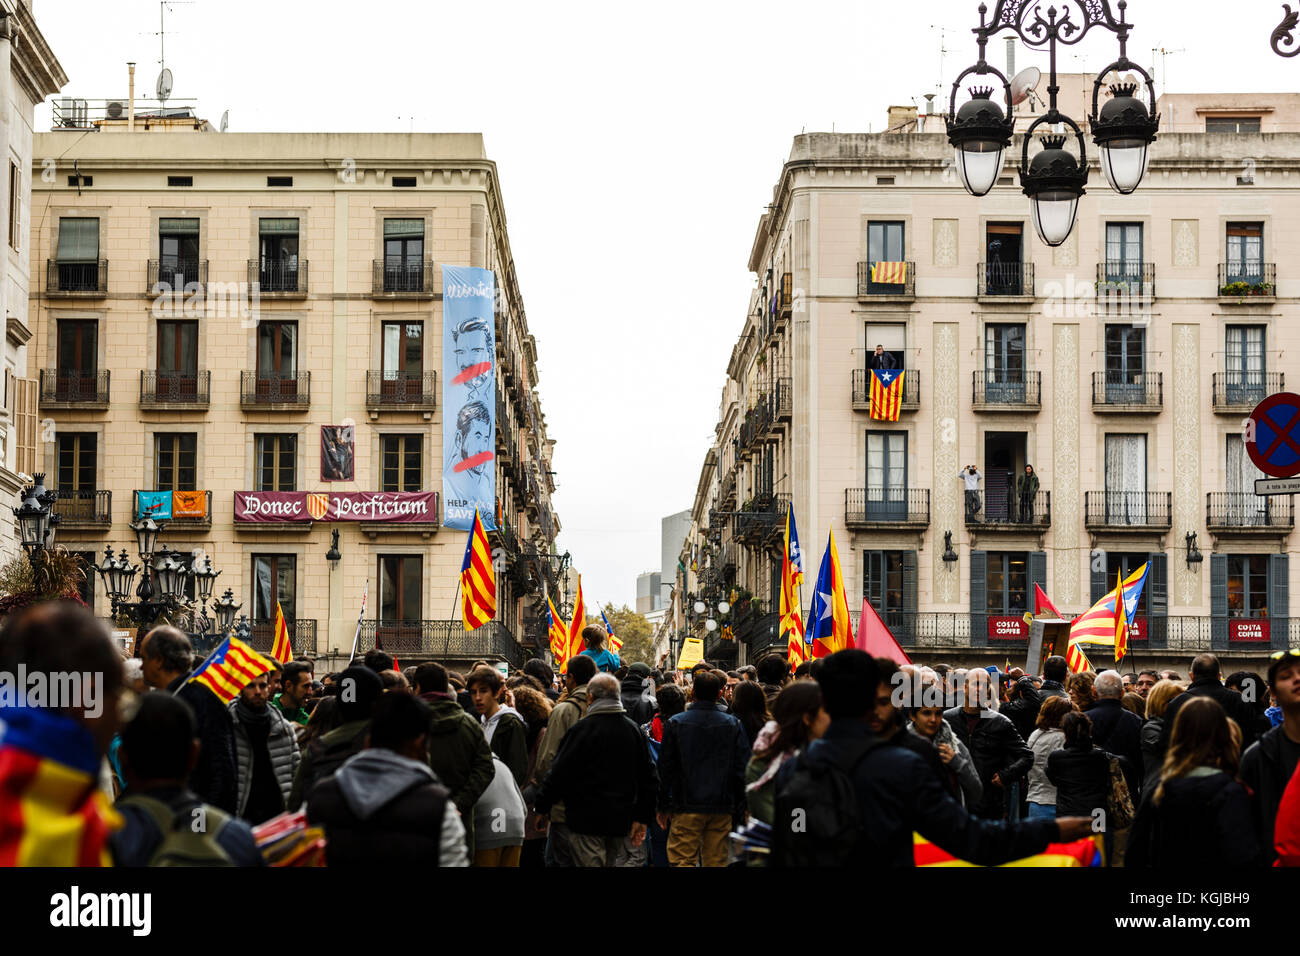 November 8, 2017 - Barcelona, Barcelona, Spain - Protesters calling for freedom for political prisoners during the concentration in Sant Jaume's Square, Barcelona Credit: Joan Gosa Badia/Alamy Stock Photo